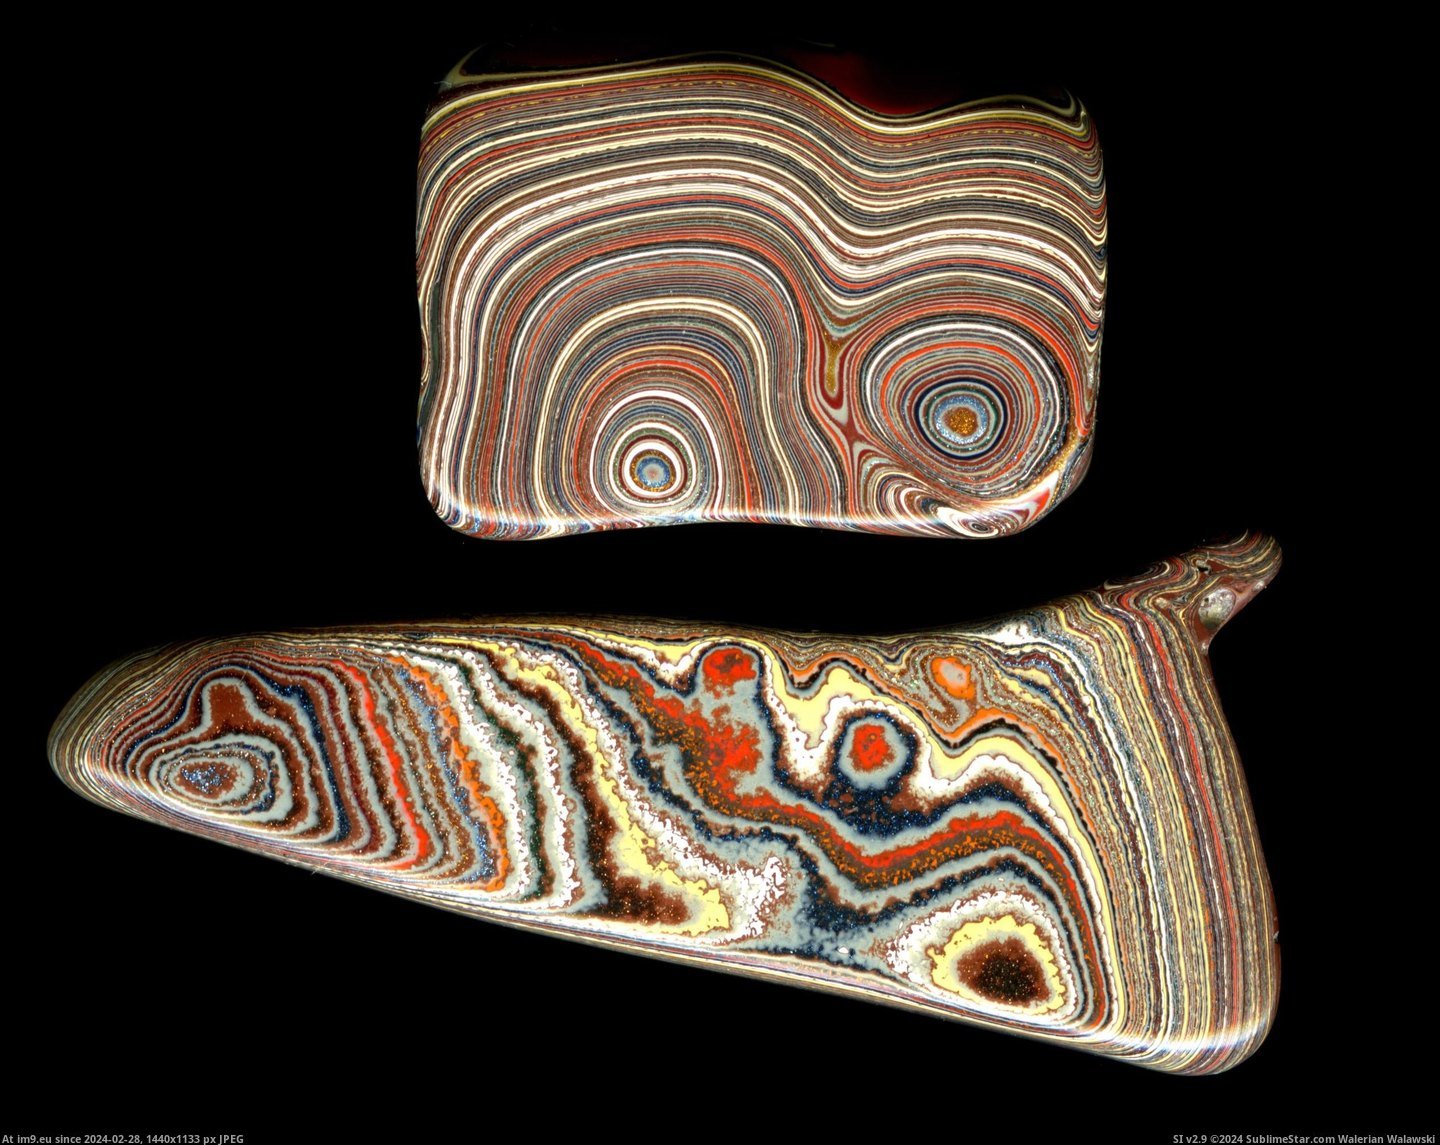 #Paint #Cars #Layers #Thousands #Agate #Enamel #Fordite #Baked #Detroit #Repeatedly [Pics] This is Fordite, or ''Detroit agate'', thousands of layers of repeatedly baked enamel paint from the days when cars were  Pic. (Image of album My r/PICS favs))